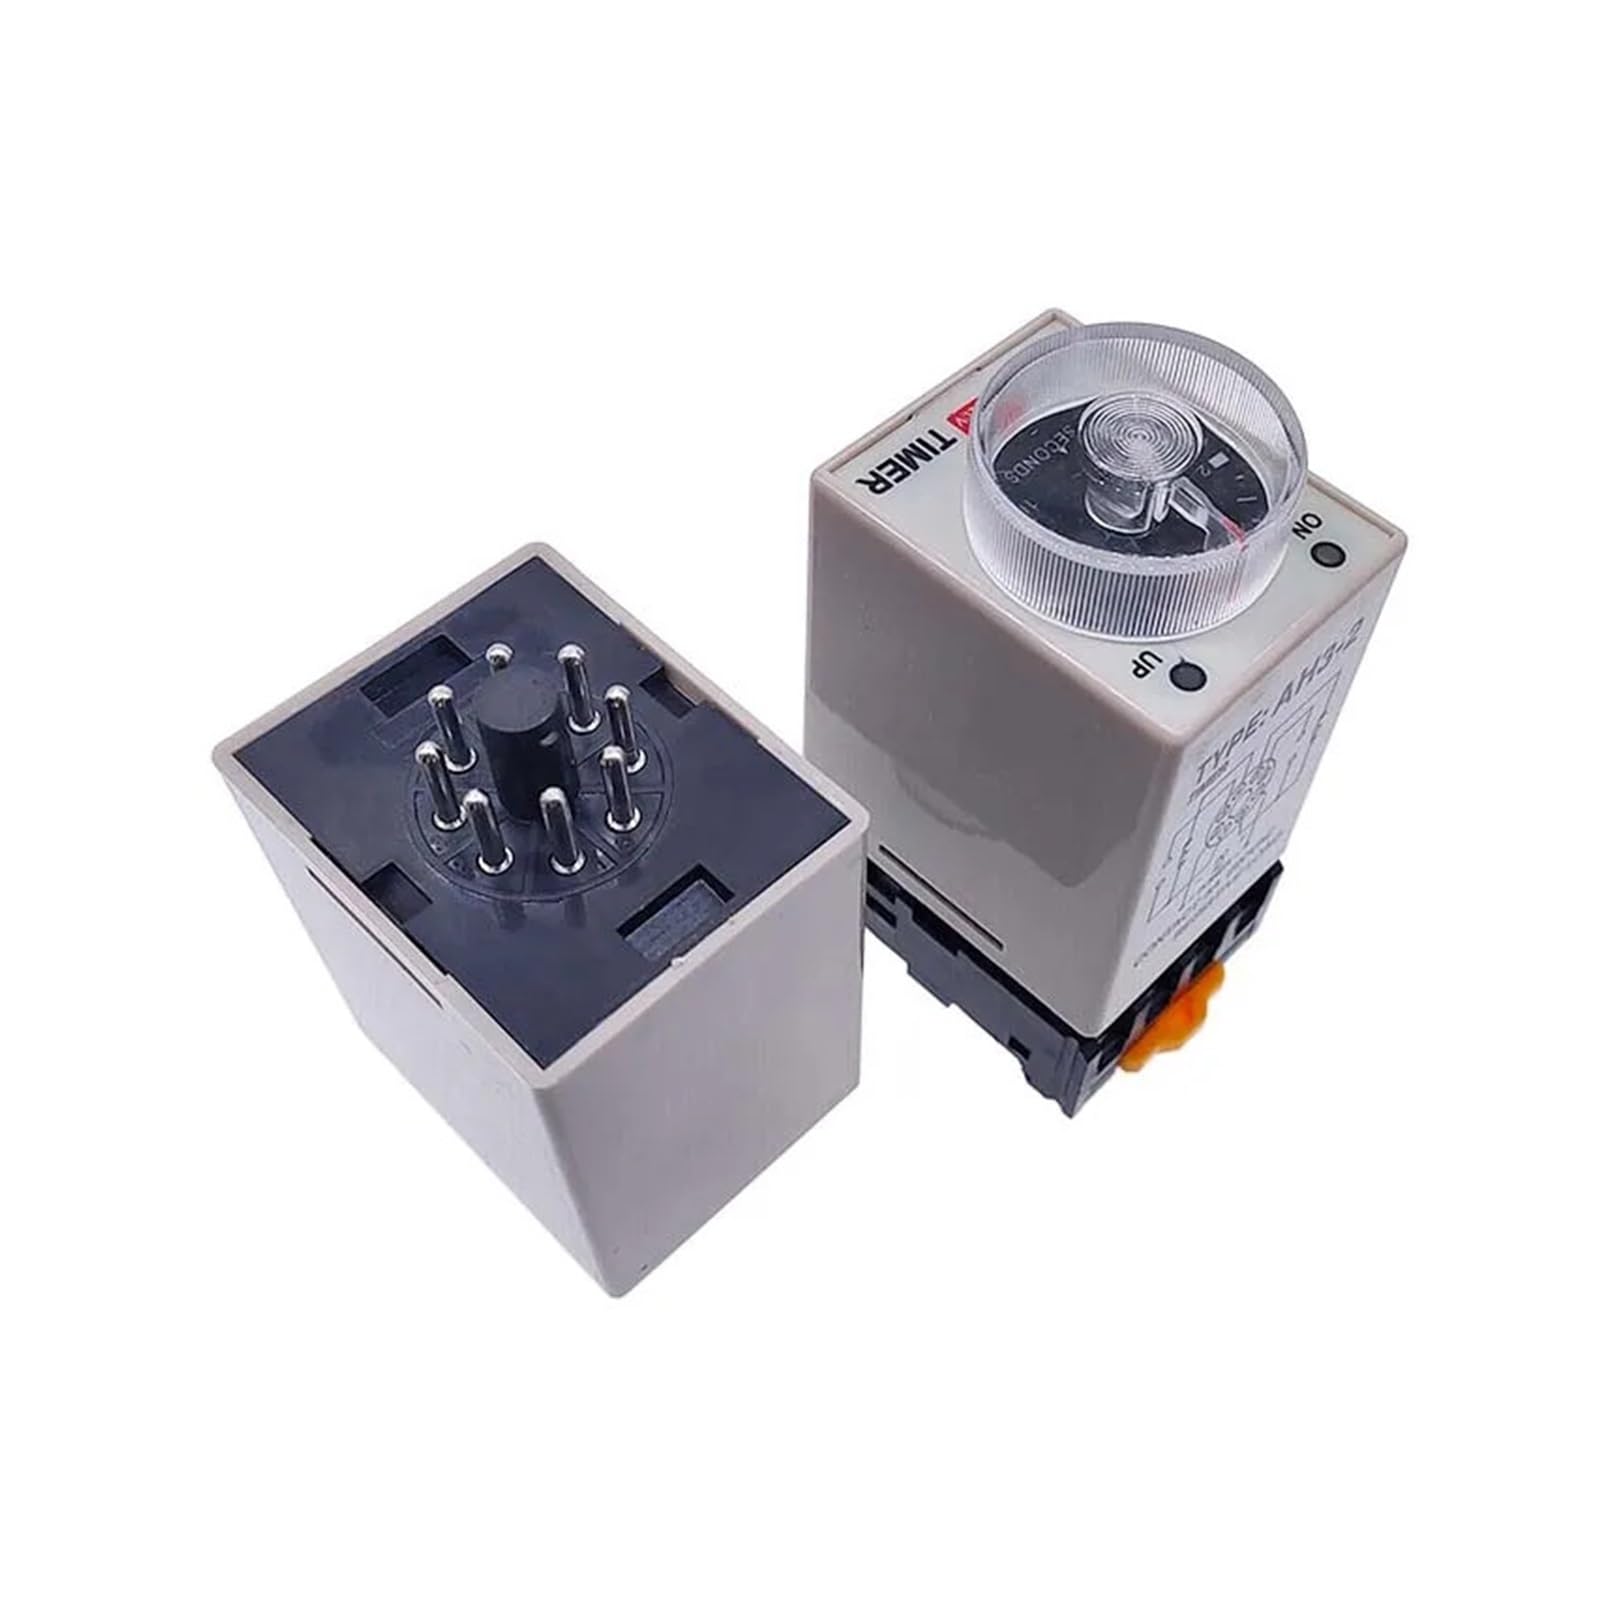 1 PC AH3-2 Power-on Delay Timer AH3-3 Time Relay AC Thick Stitch Time Set Range 1S/5S/10S/30S/60S/5M/10M/30M NWPNLXEA(AC110V,AH3-3 0-30Seconds) von NWPNLXEA